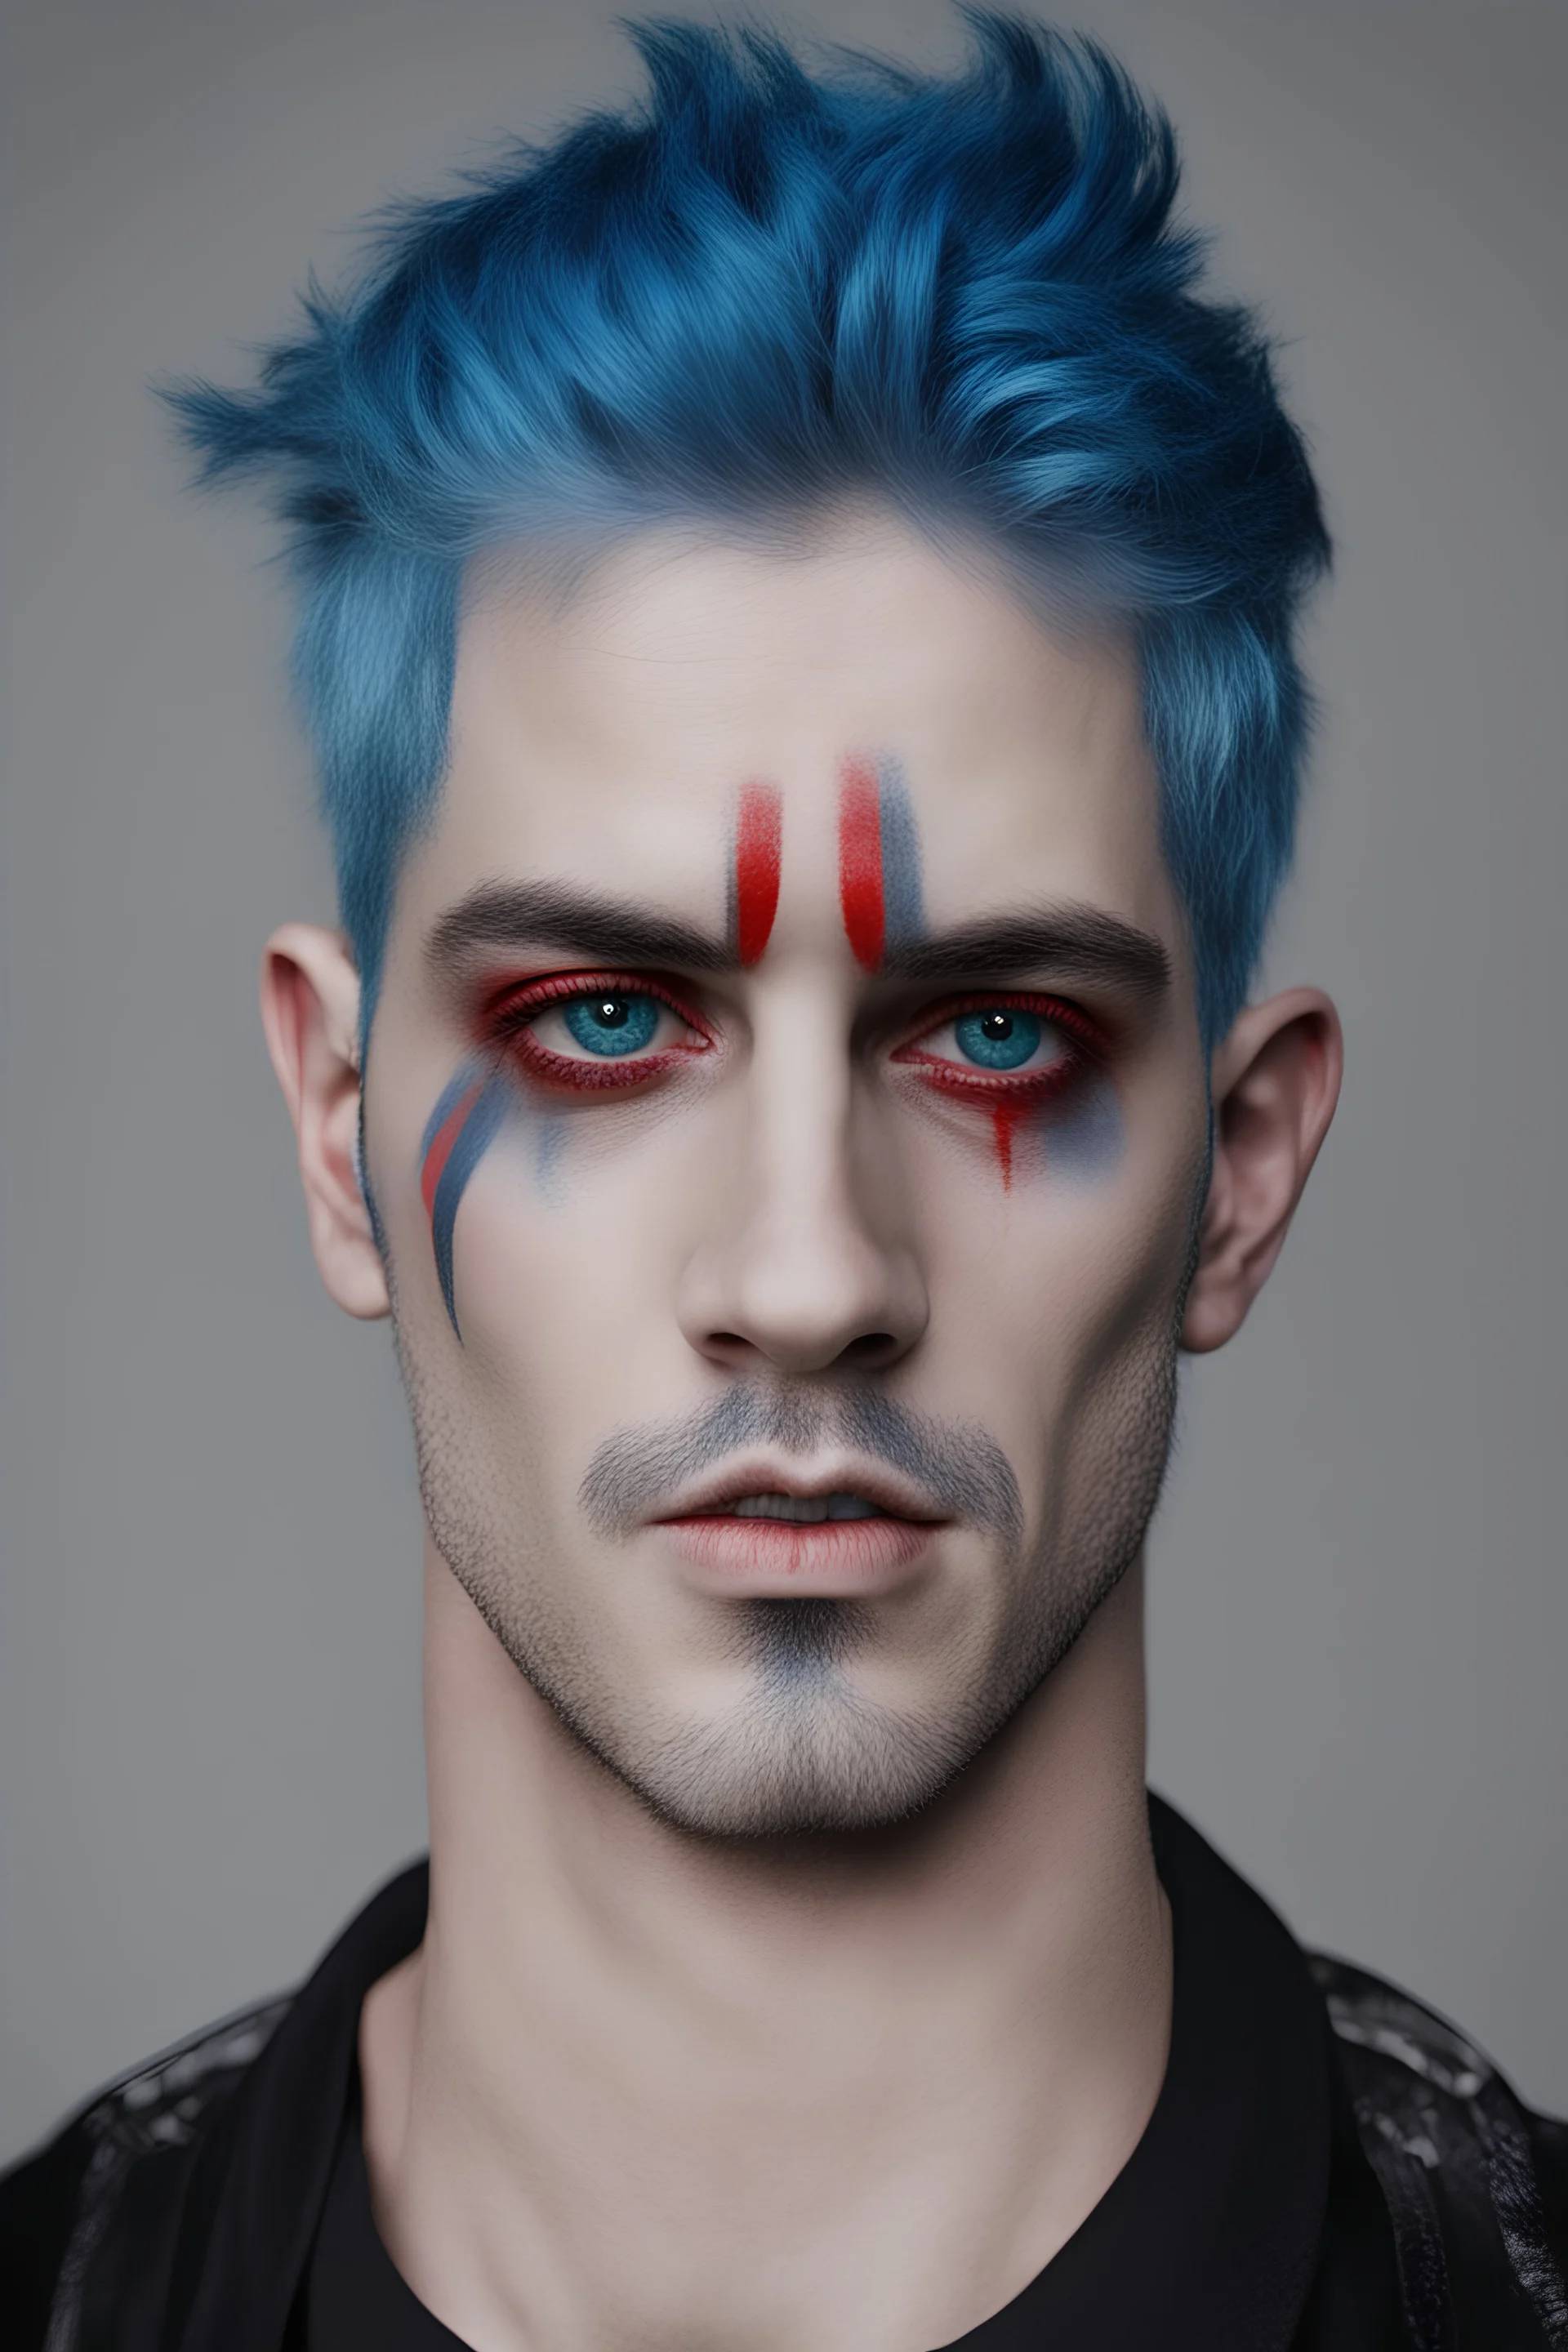 A man with blue hair with black stripes and red eye color